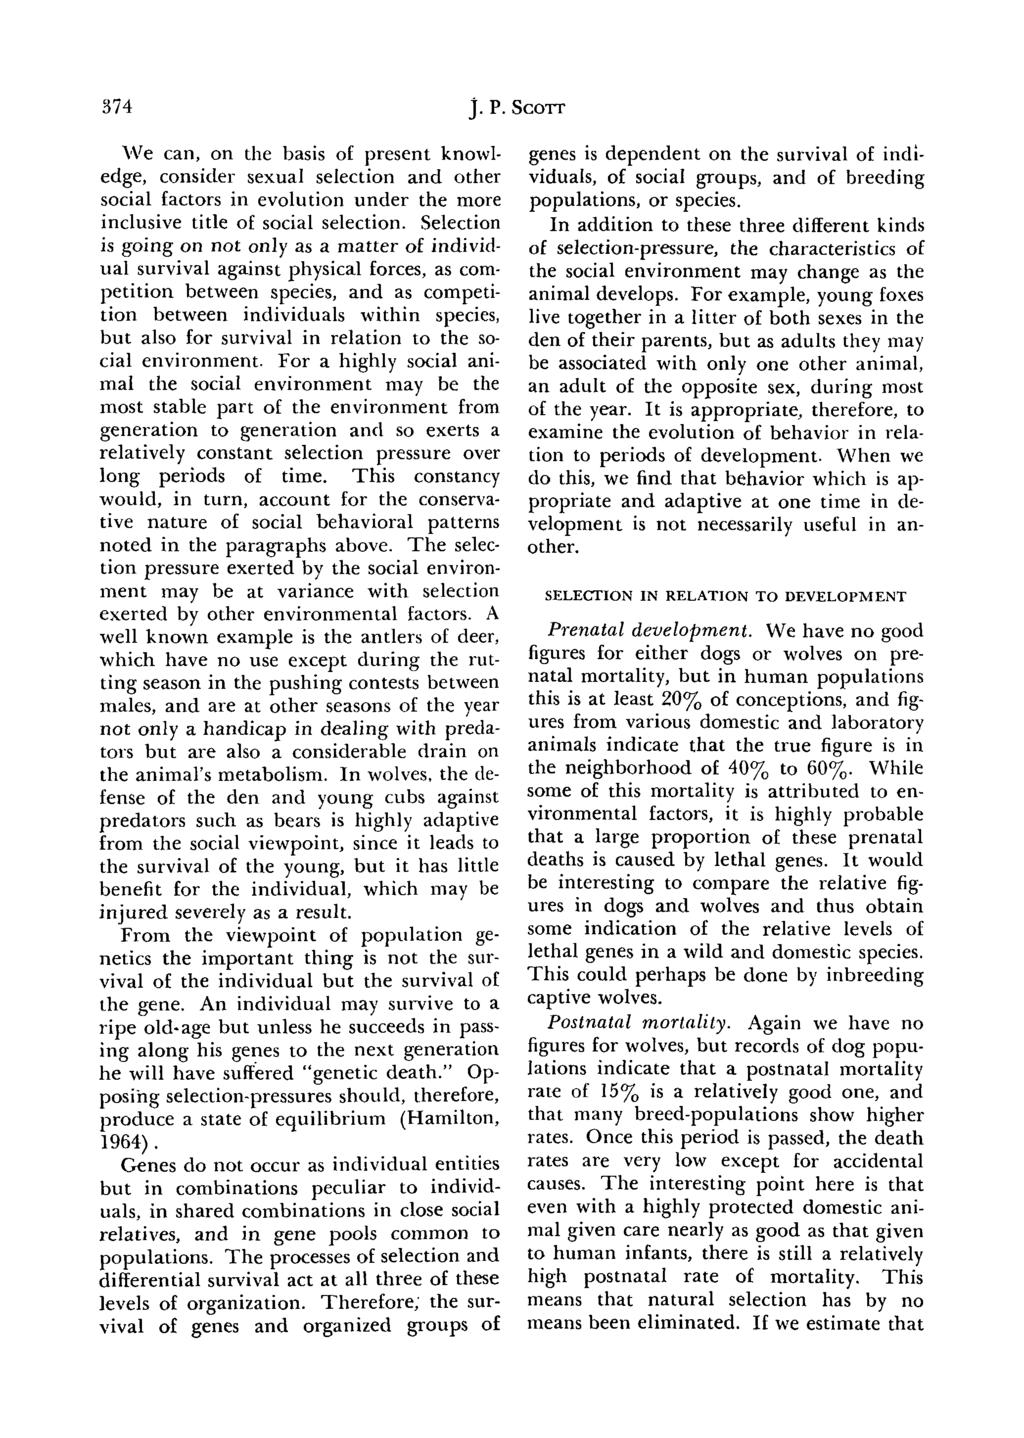 374 j. P. SCOTT We can, on the basis of present knowledge, consider sexual selection and other social factors in evolution under the more inclusive title of social selection.